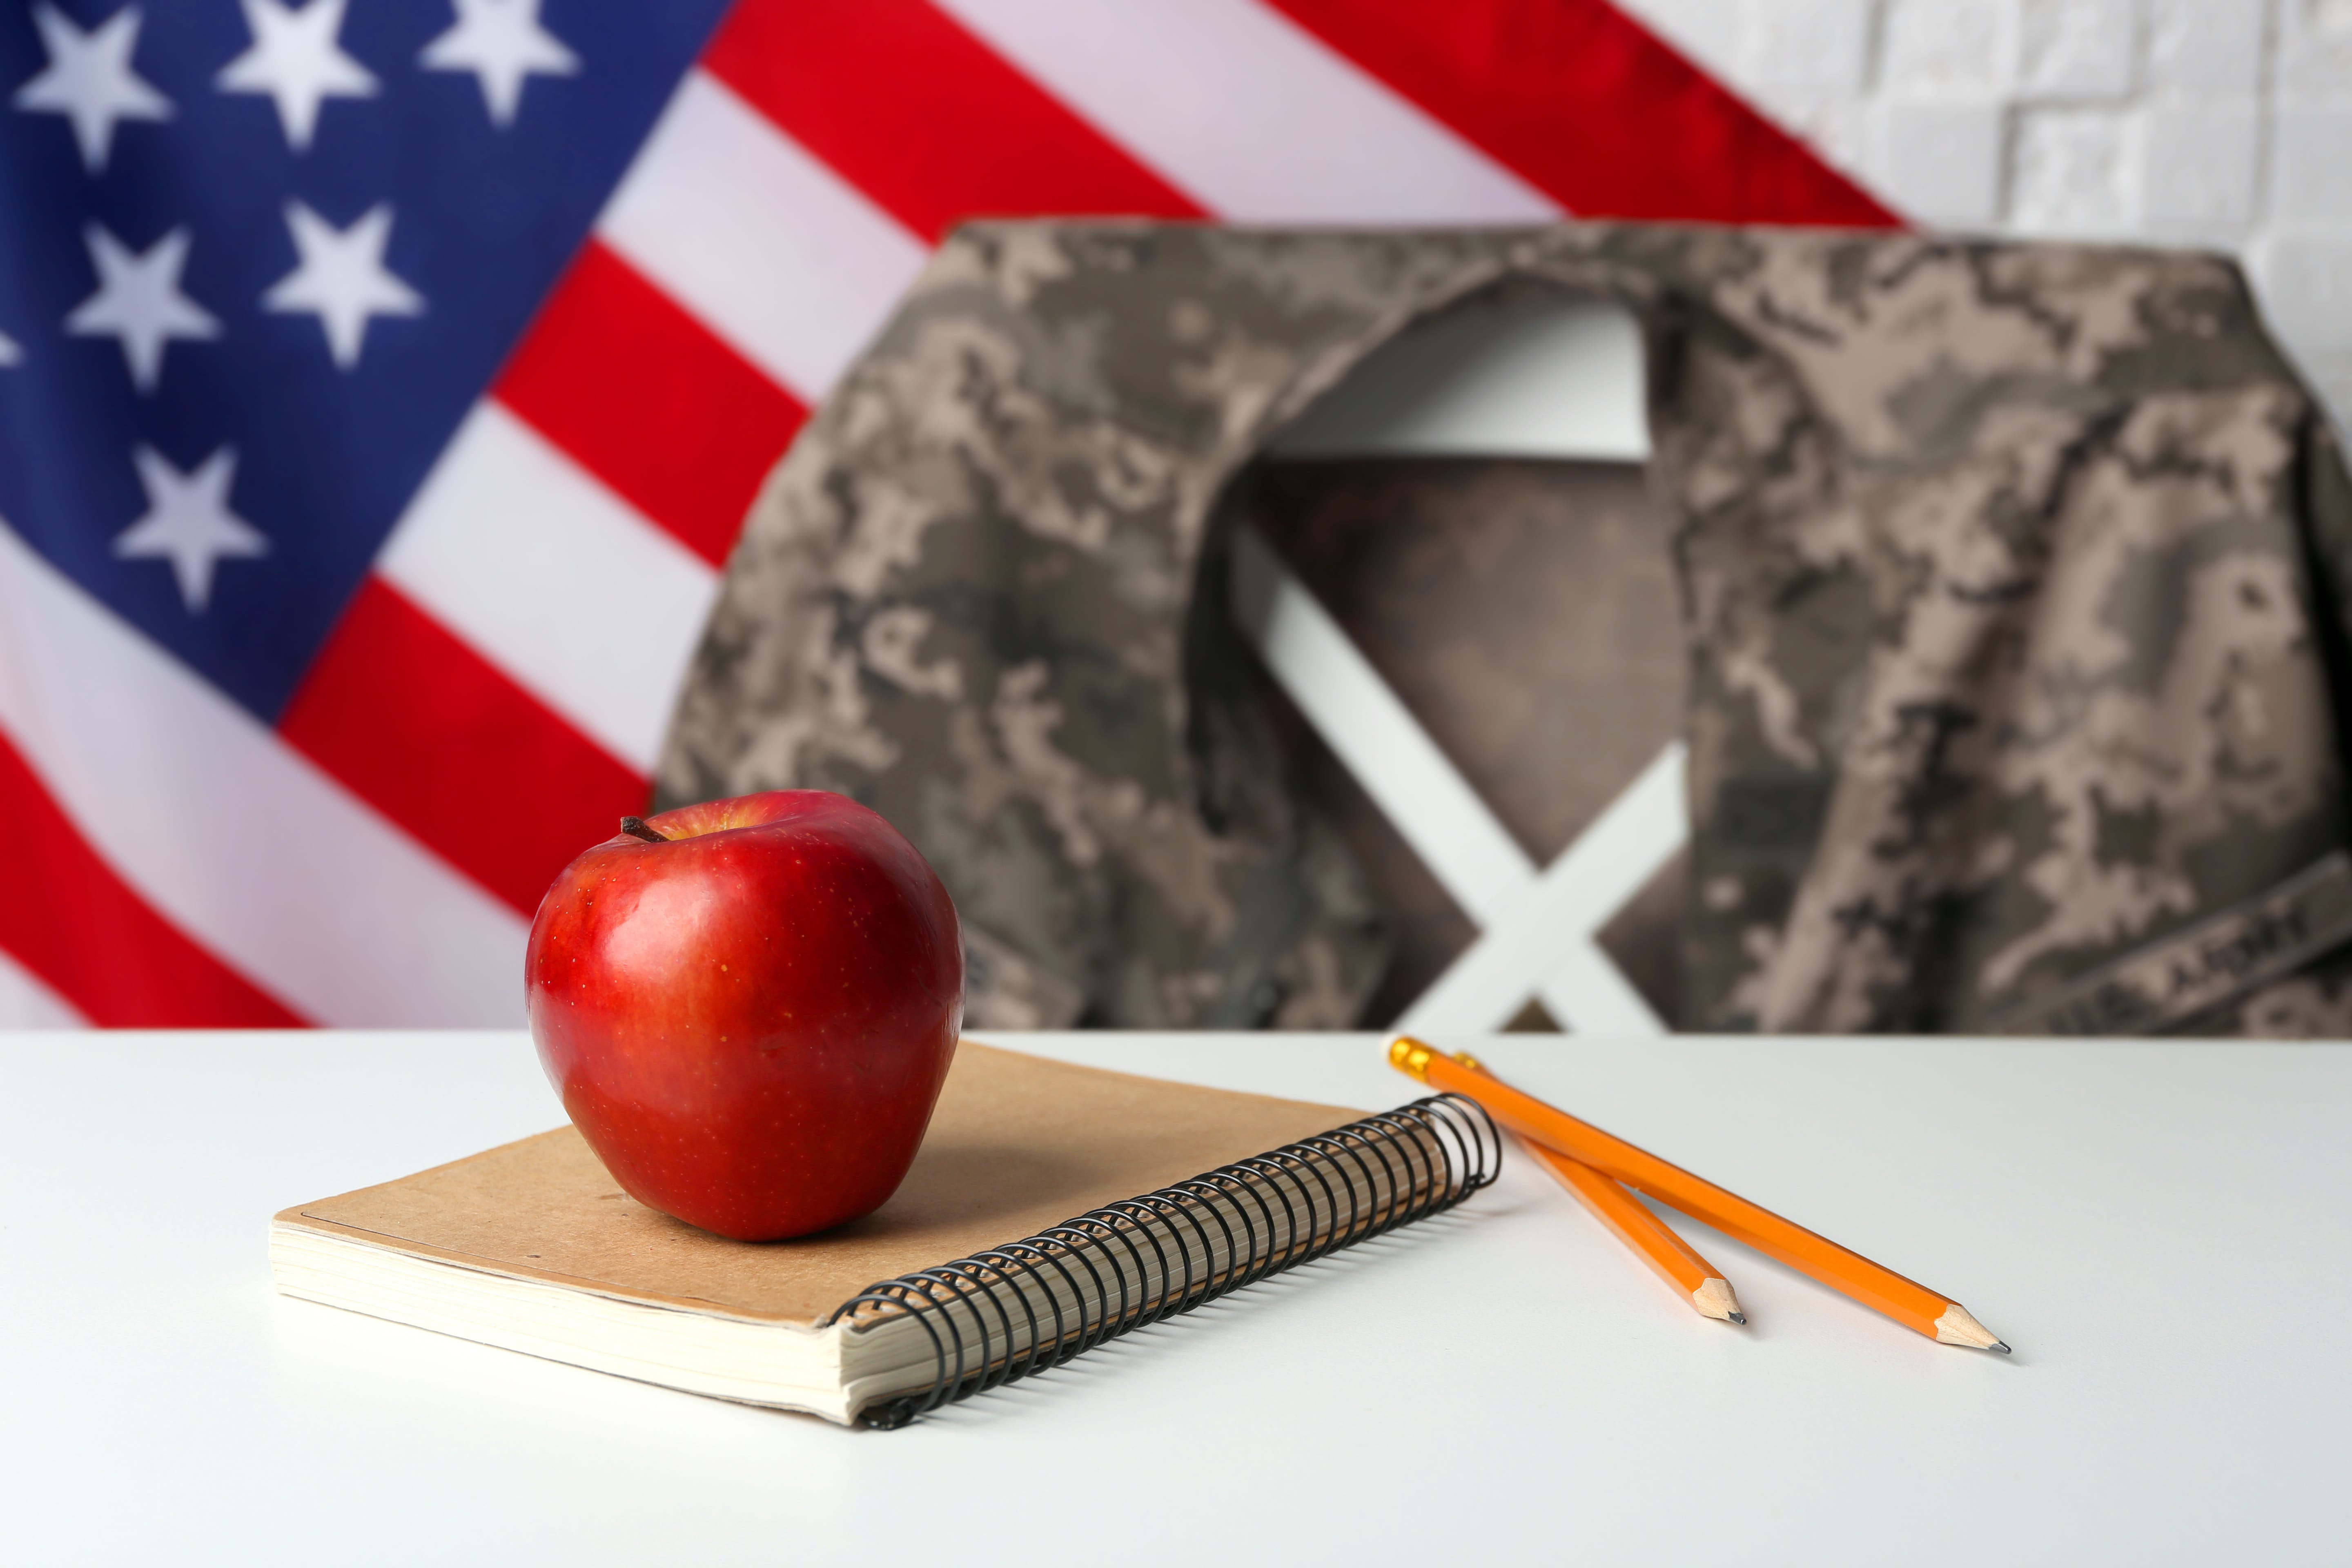 A notebook with an apple on top of it and 2 pencils. An American flag in the background with an Army Jacket draped over a chair.